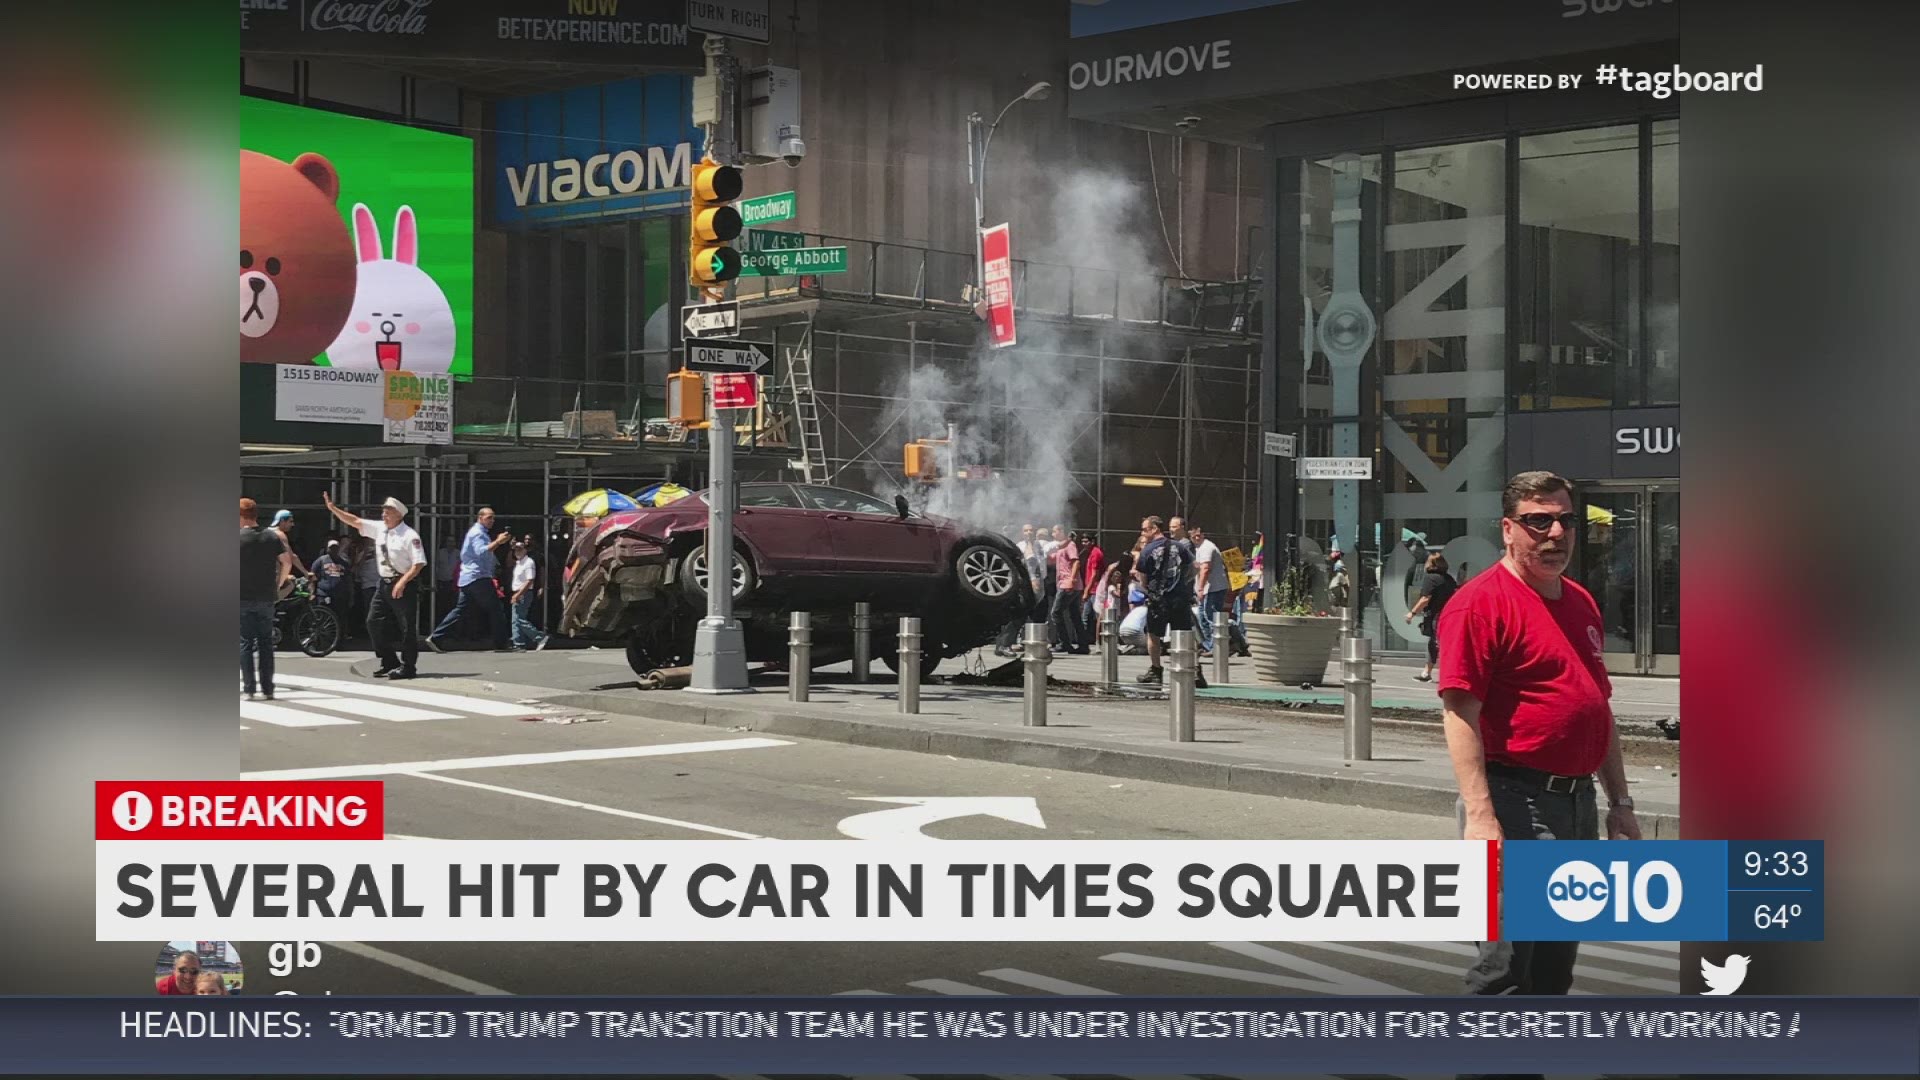 A car plowed into a crowd of people in NYC's Time Square Thursday. One person died, at least a dozen others were injured. ABC10's Dina Kupfer has the breaking news report.